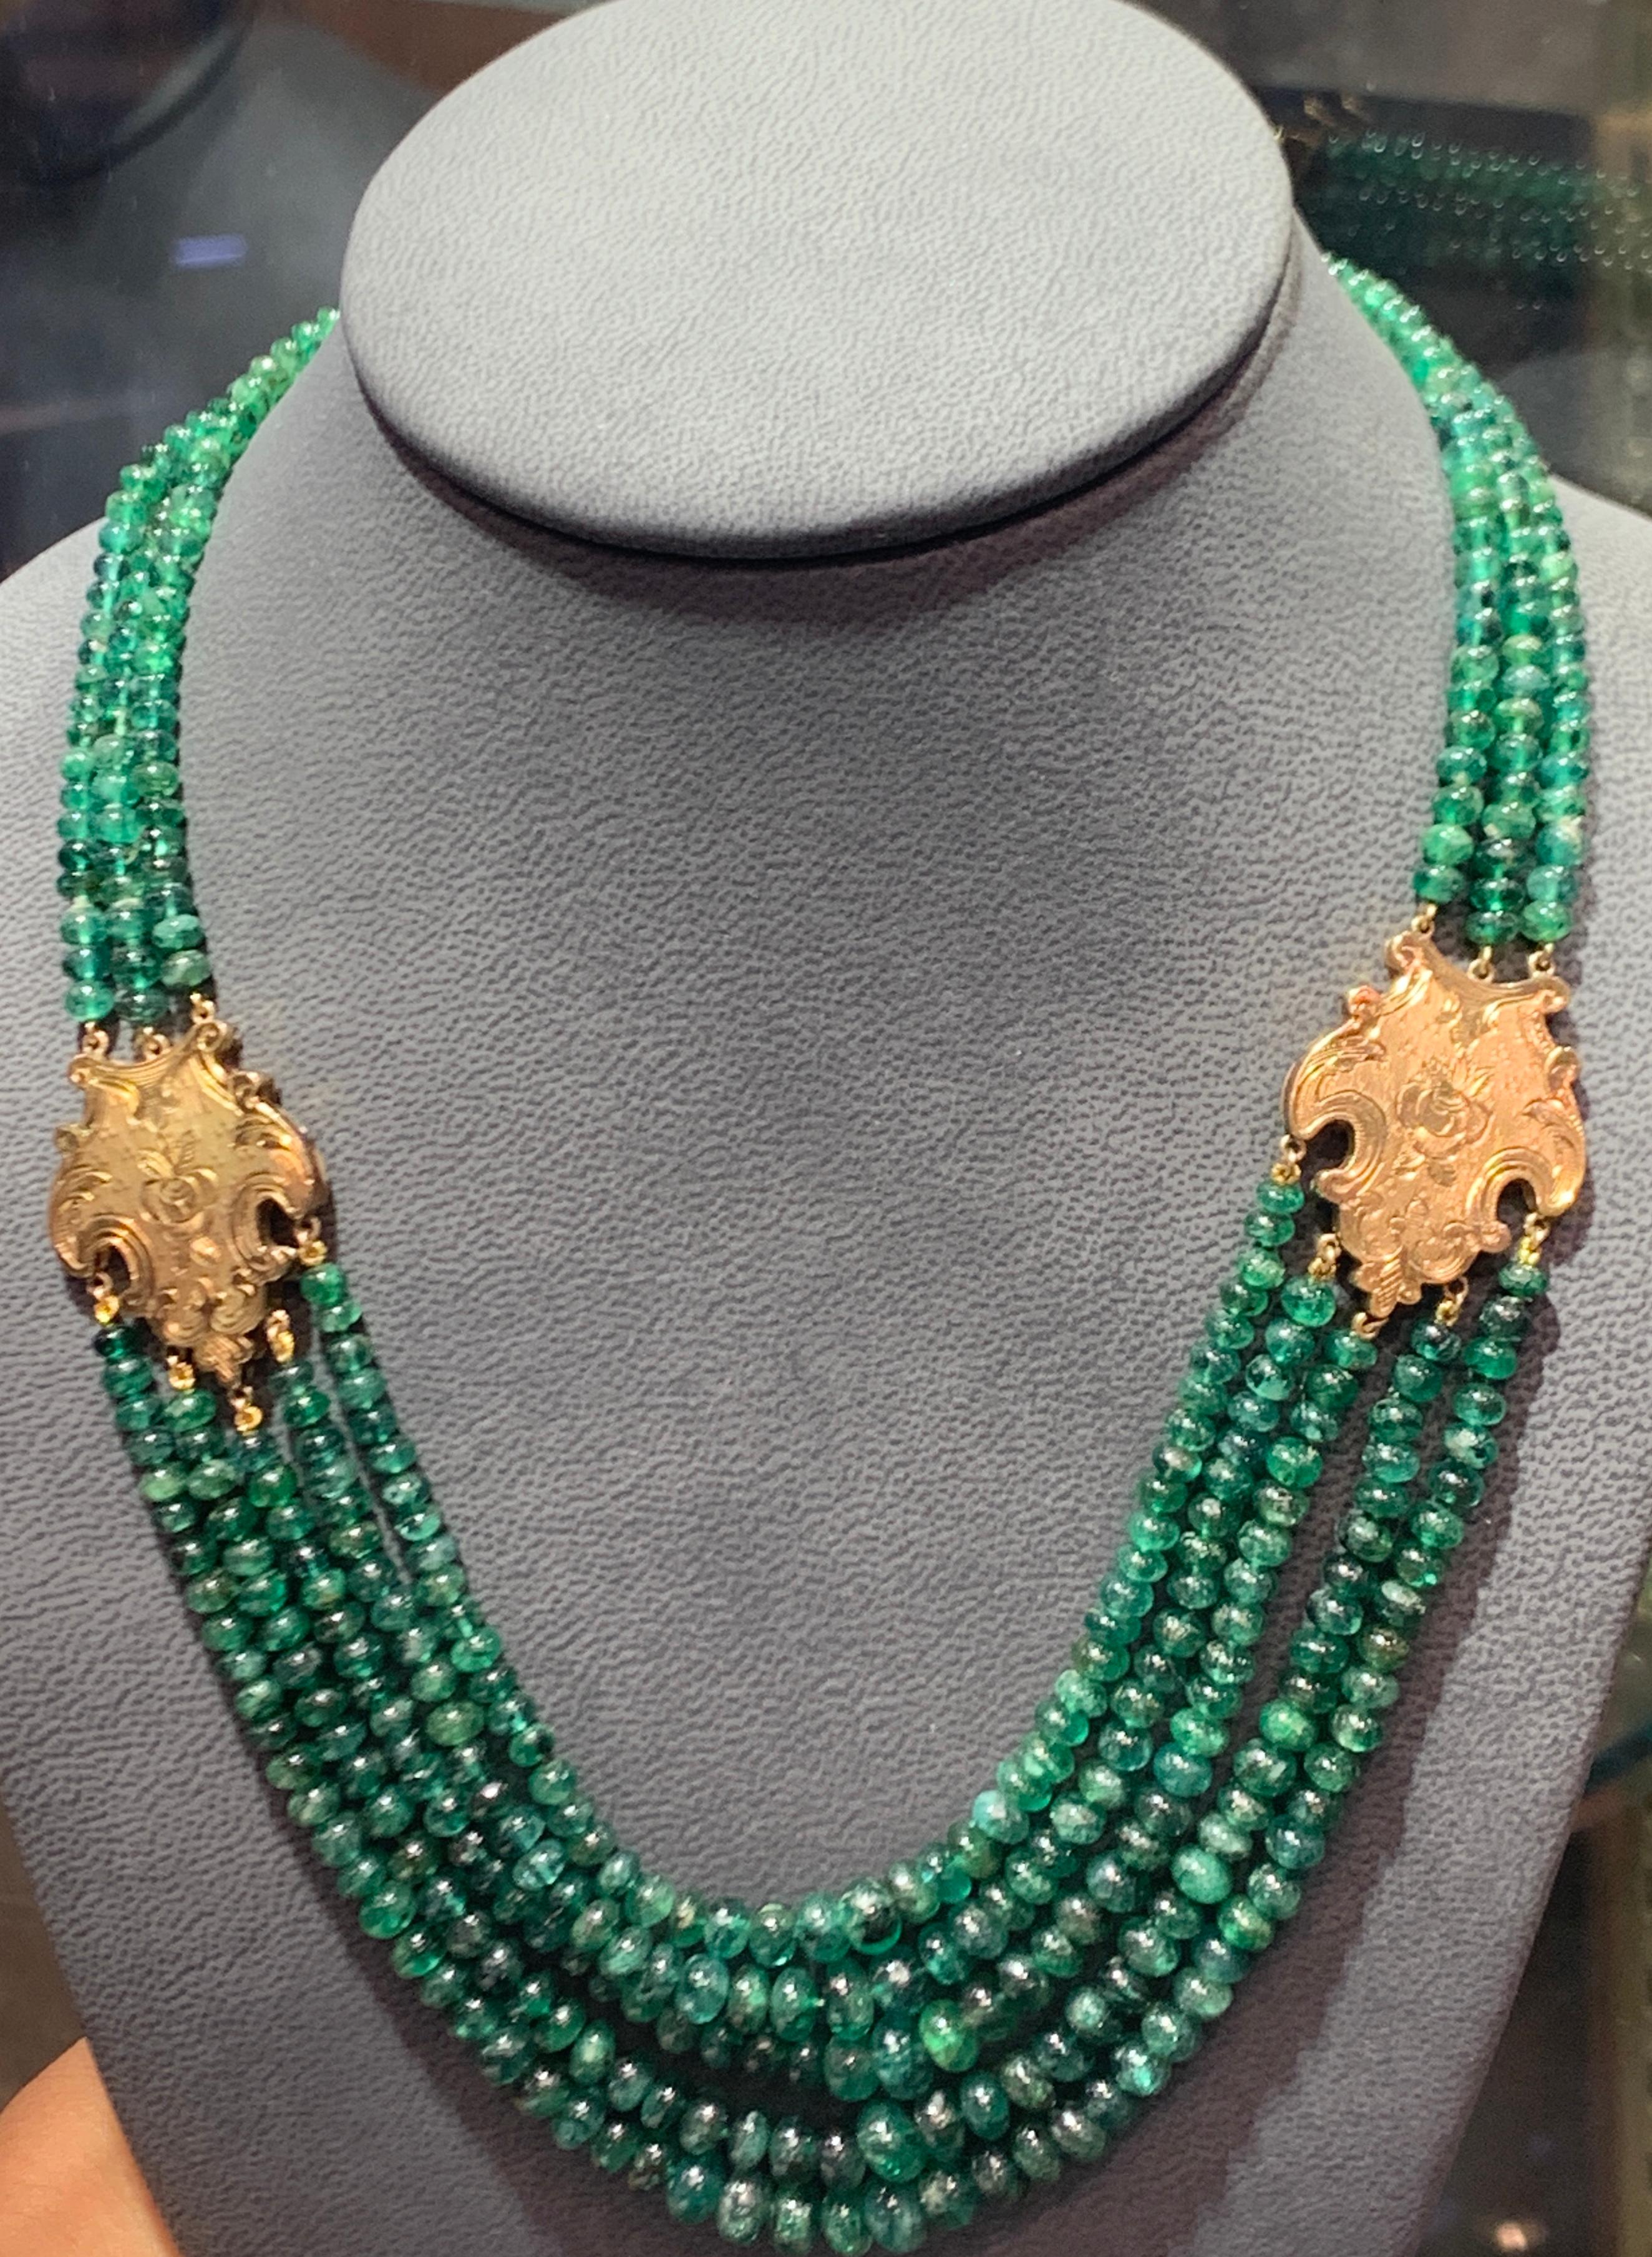 Emerald Graduated Bead Necklace
Gold Type: 14K Yellow Gold 
Necklace Length: 18